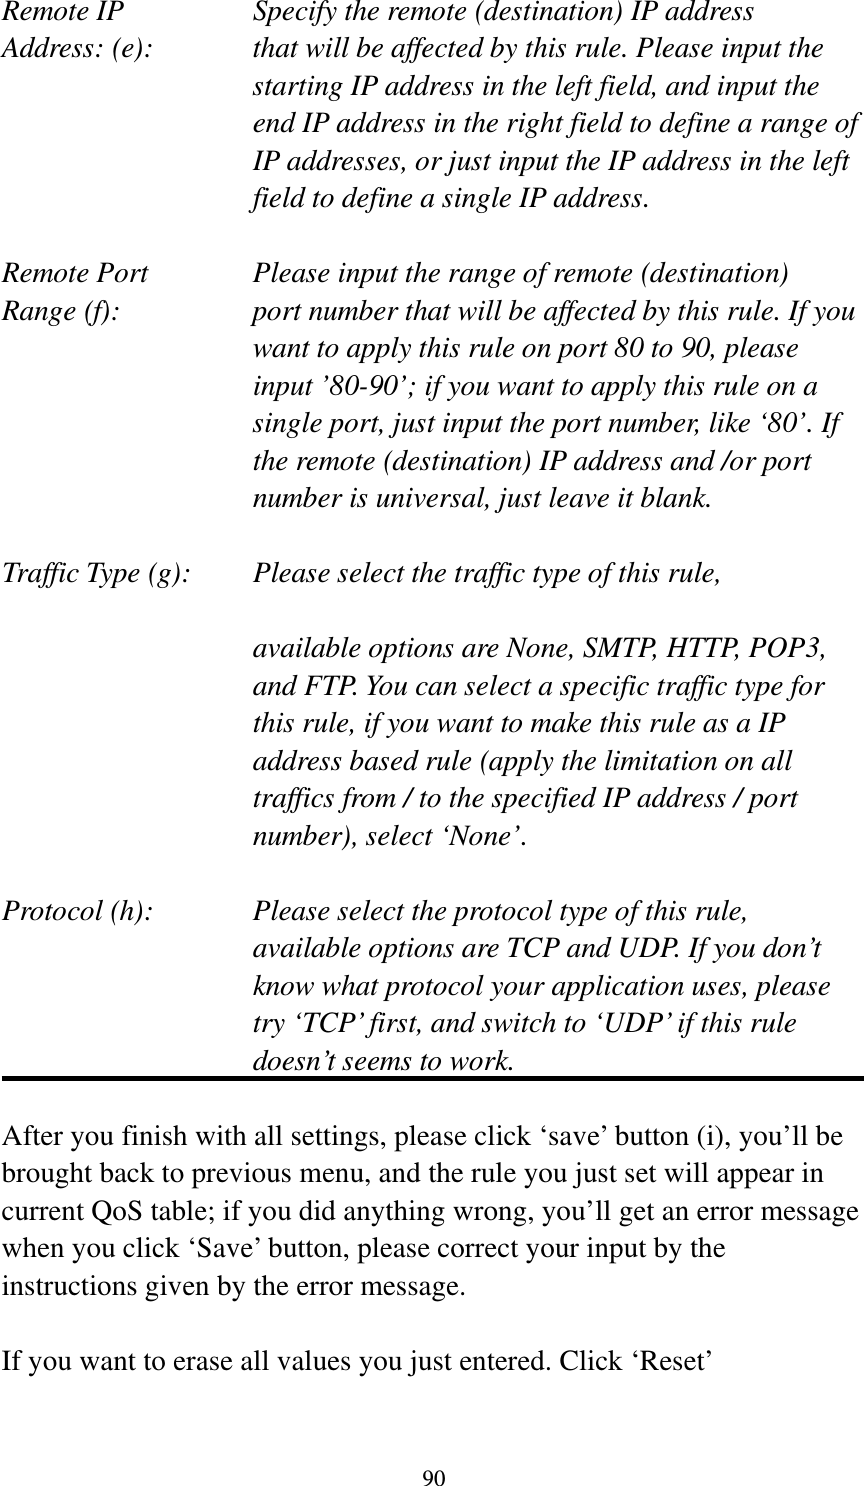 90 Remote IP        Specify the remote (destination) IP address Address: (e):    that will be affected by this rule. Please input the starting IP address in the left field, and input the end IP address in the right field to define a range of IP addresses, or just input the IP address in the left field to define a single IP address.  Remote Port      Please input the range of remote (destination) Range (f):  port number that will be affected by this rule. If you want to apply this rule on port 80 to 90, please input ’80-90’; if you want to apply this rule on a single port, just input the port number, like ‘80’. If the remote (destination) IP address and /or port number is universal, just leave it blank.  Traffic Type (g):    Please select the traffic type of this rule,  available options are None, SMTP, HTTP, POP3, and FTP. You can select a specific traffic type for this rule, if you want to make this rule as a IP address based rule (apply the limitation on all traffics from / to the specified IP address / port number), select ‘None’.  Protocol (h):      Please select the protocol type of this rule,   available options are TCP and UDP. If you don’t know what protocol your application uses, please try ‘TCP’ first, and switch to ‘UDP’ if this rule doesn’t seems to work.  After you finish with all settings, please click ‘save’ button (i), you’ll be brought back to previous menu, and the rule you just set will appear in current QoS table; if you did anything wrong, you’ll get an error message when you click ‘Save’ button, please correct your input by the instructions given by the error message.  If you want to erase all values you just entered. Click ‘Reset’ 